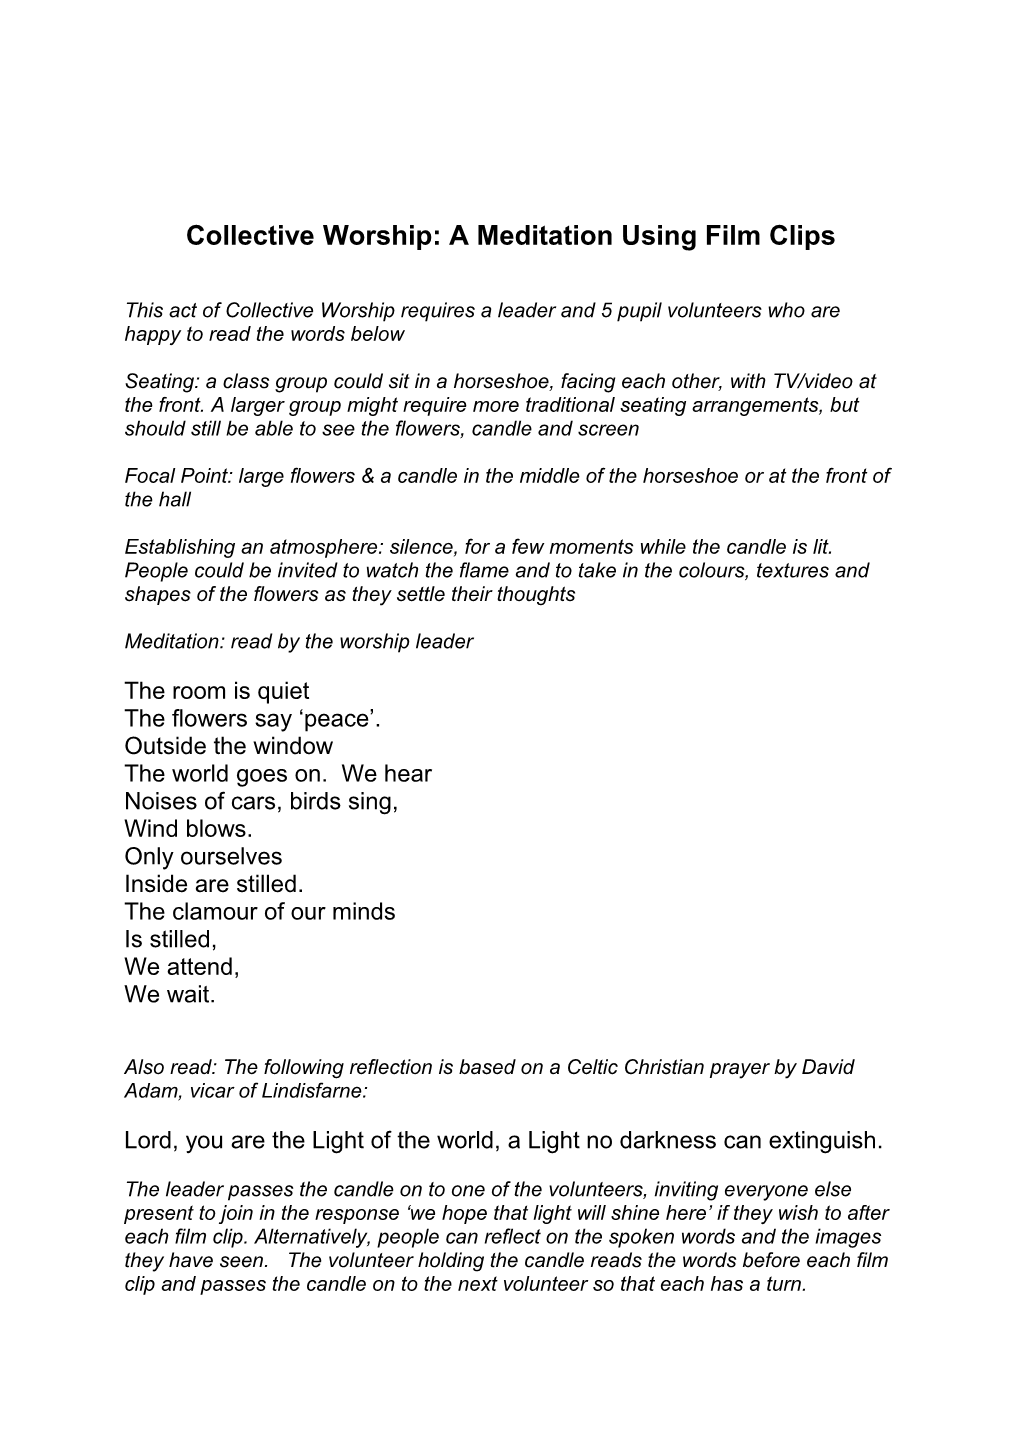 Collective Worship: a Meditation Using Film Clips